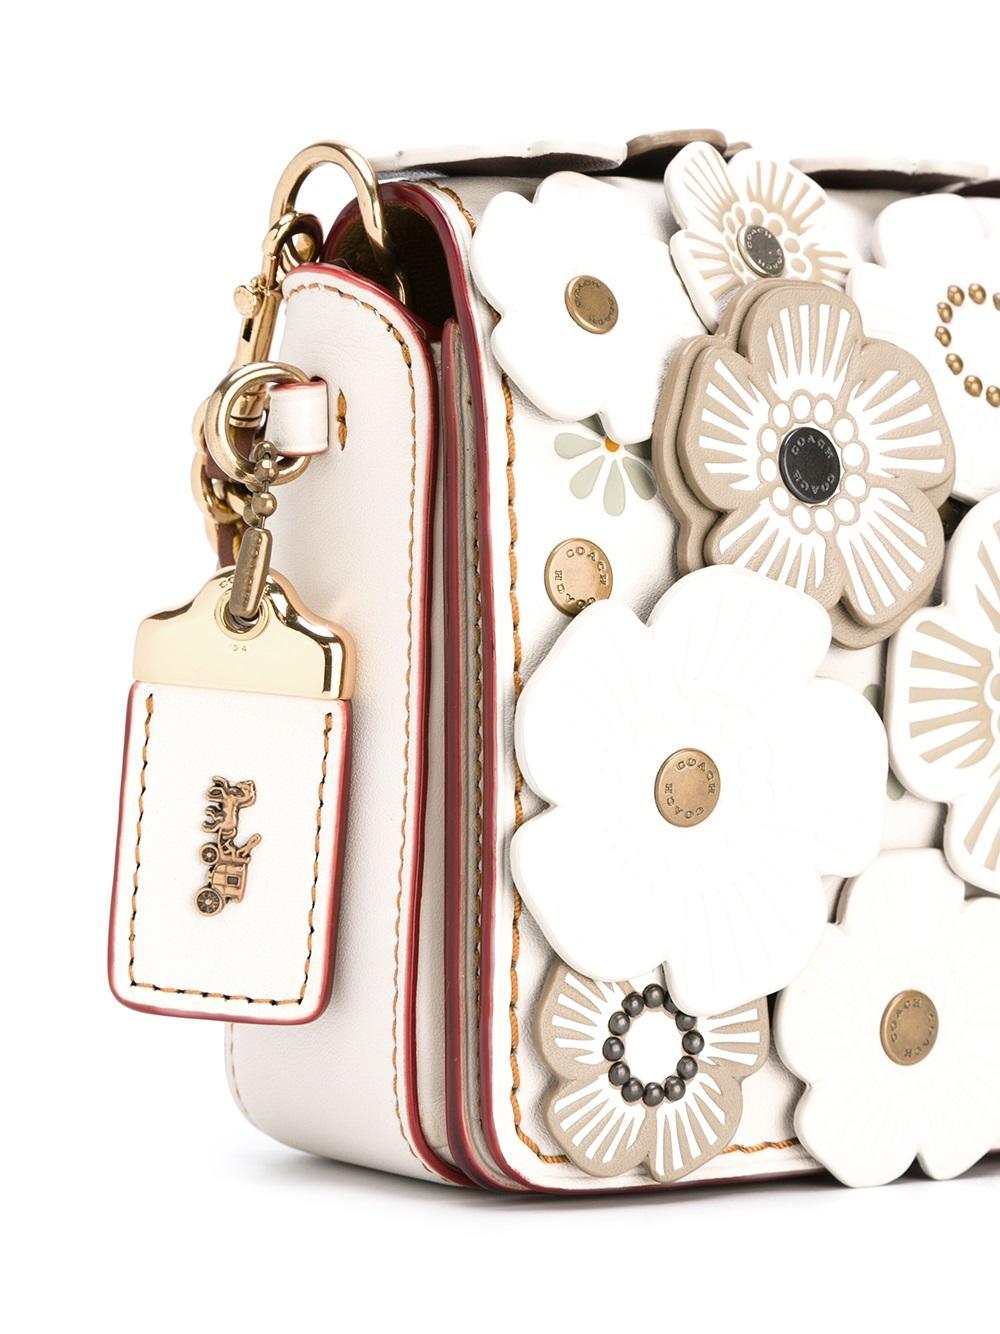 COACH 'print Dinky' Floral Applique Crossbody Bag in White